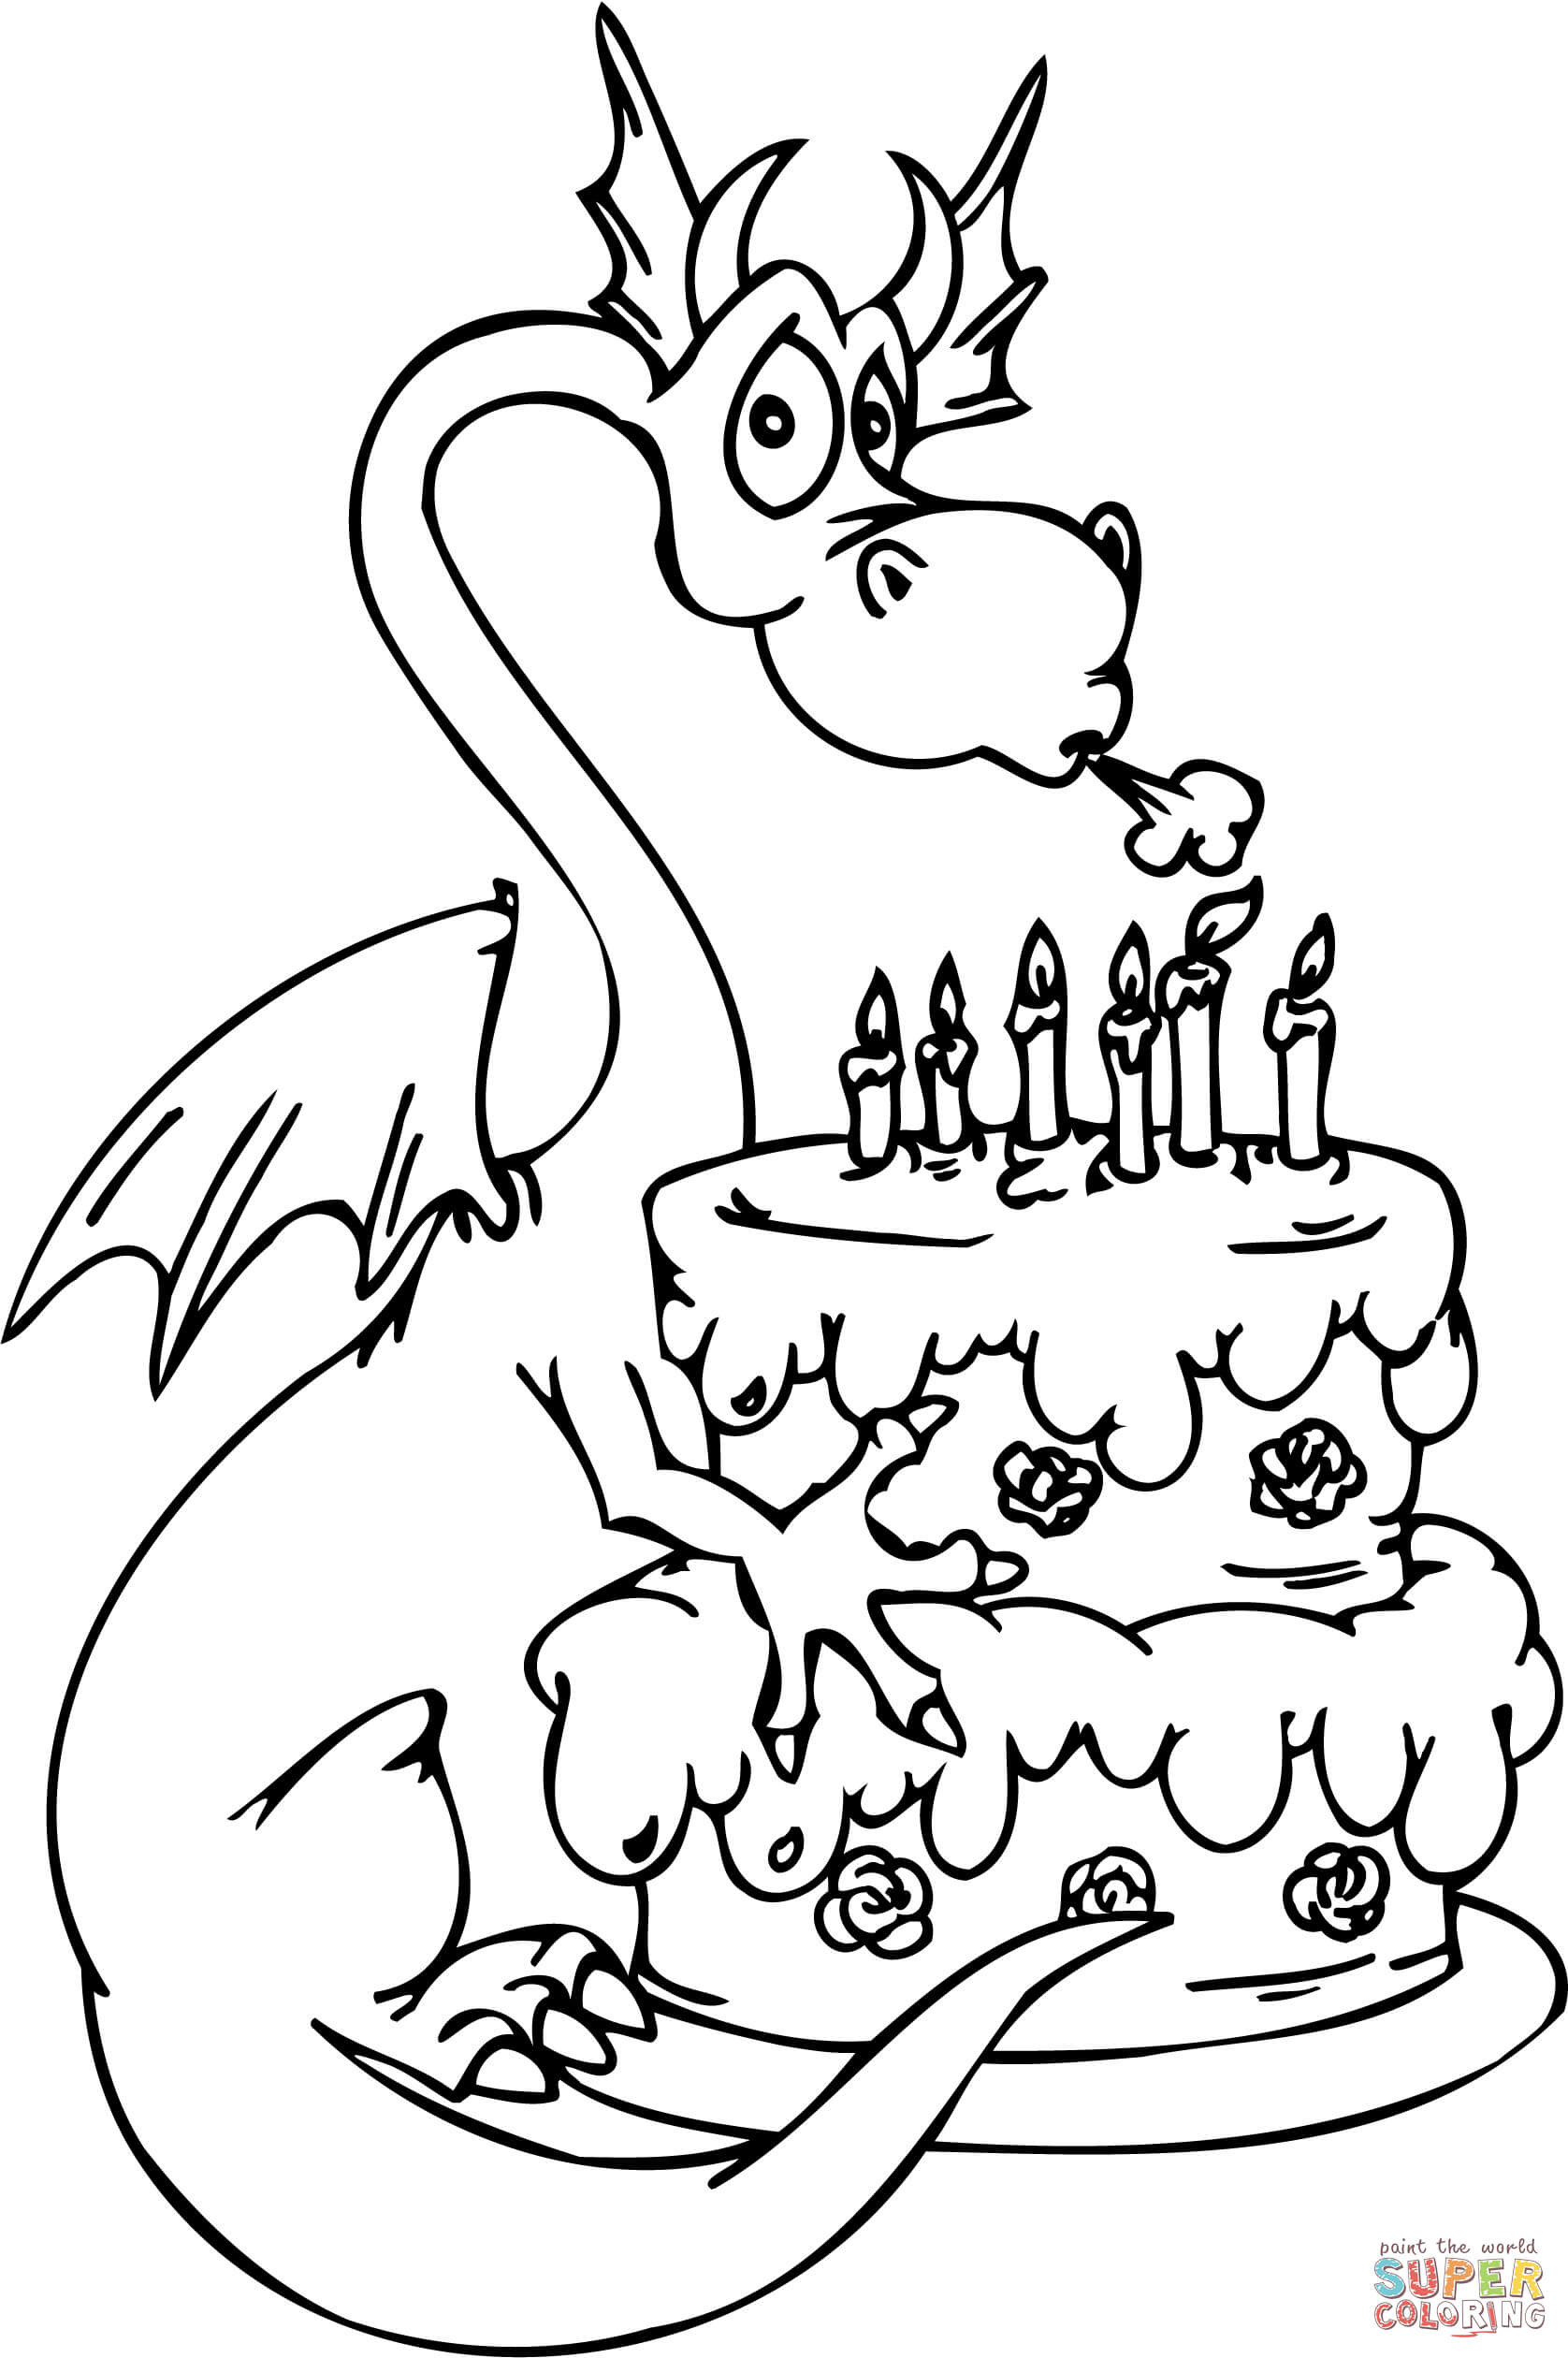 Printable Happy Birthday Coloring Pages
 Dragon with Happy Birthday Cake coloring page